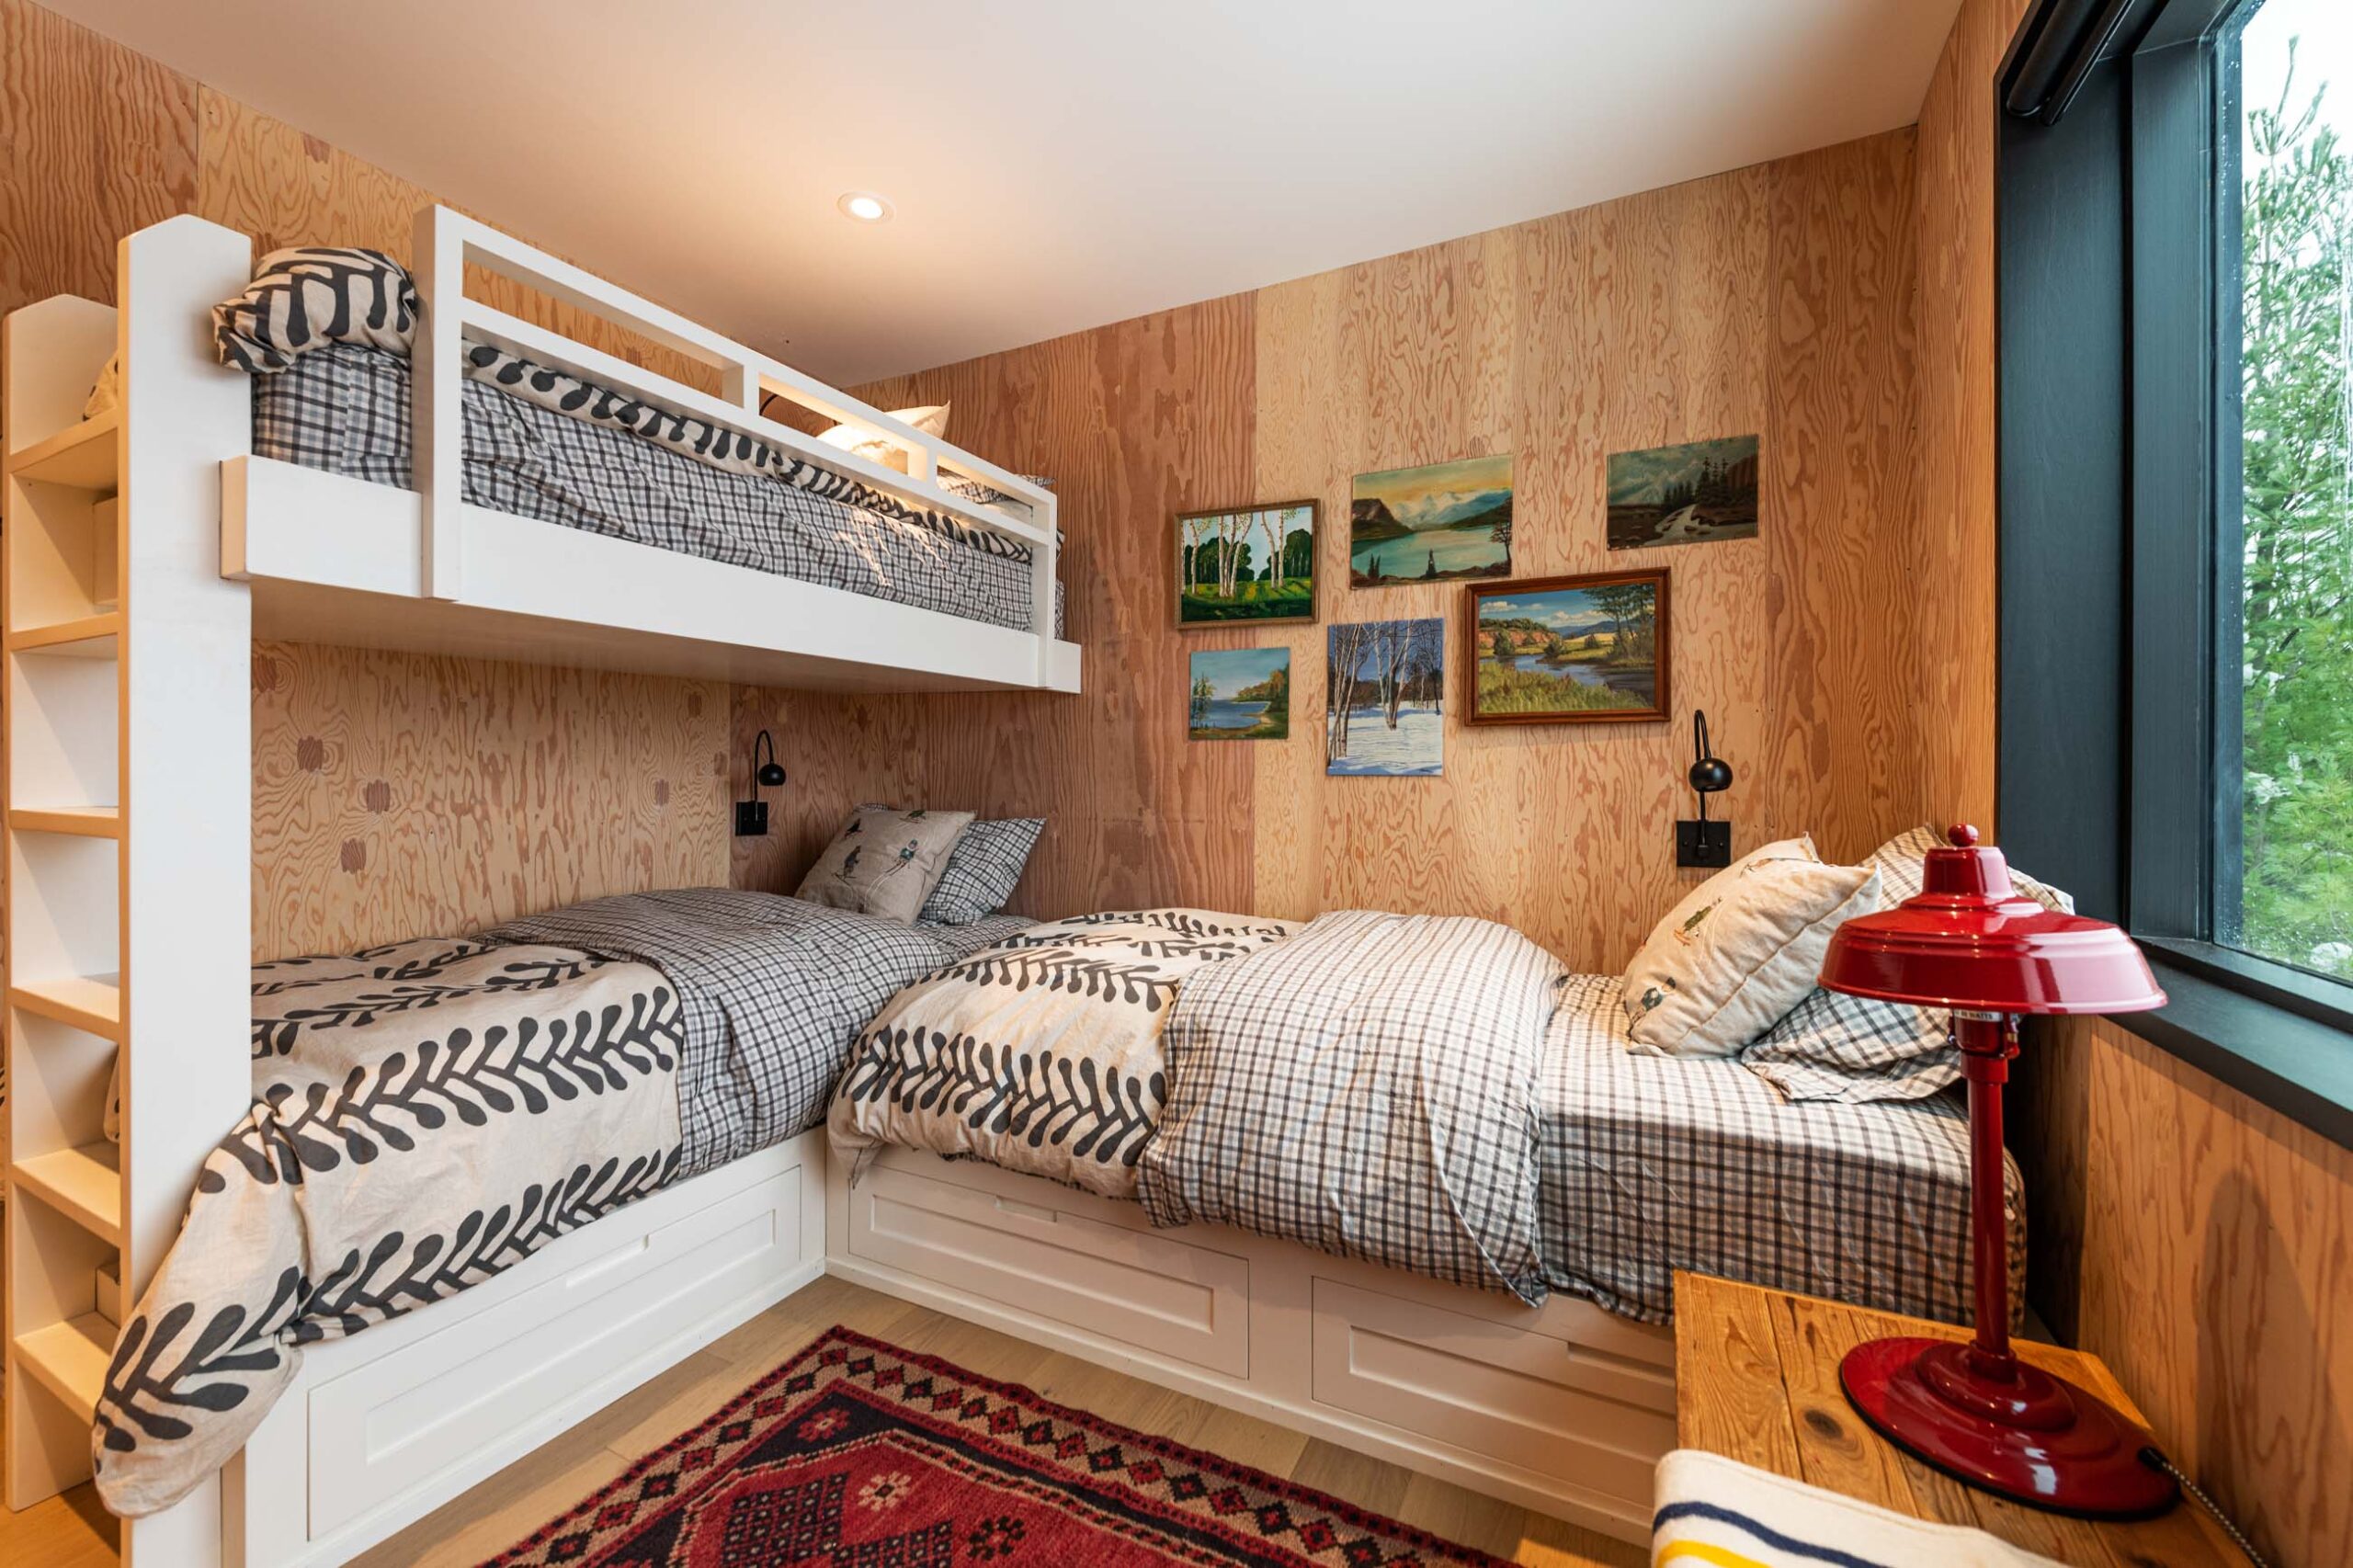 Bedroom with built-in bunk beds in a Custom Scandi-style Cabin built by Blake Farrow Project Management Inc.